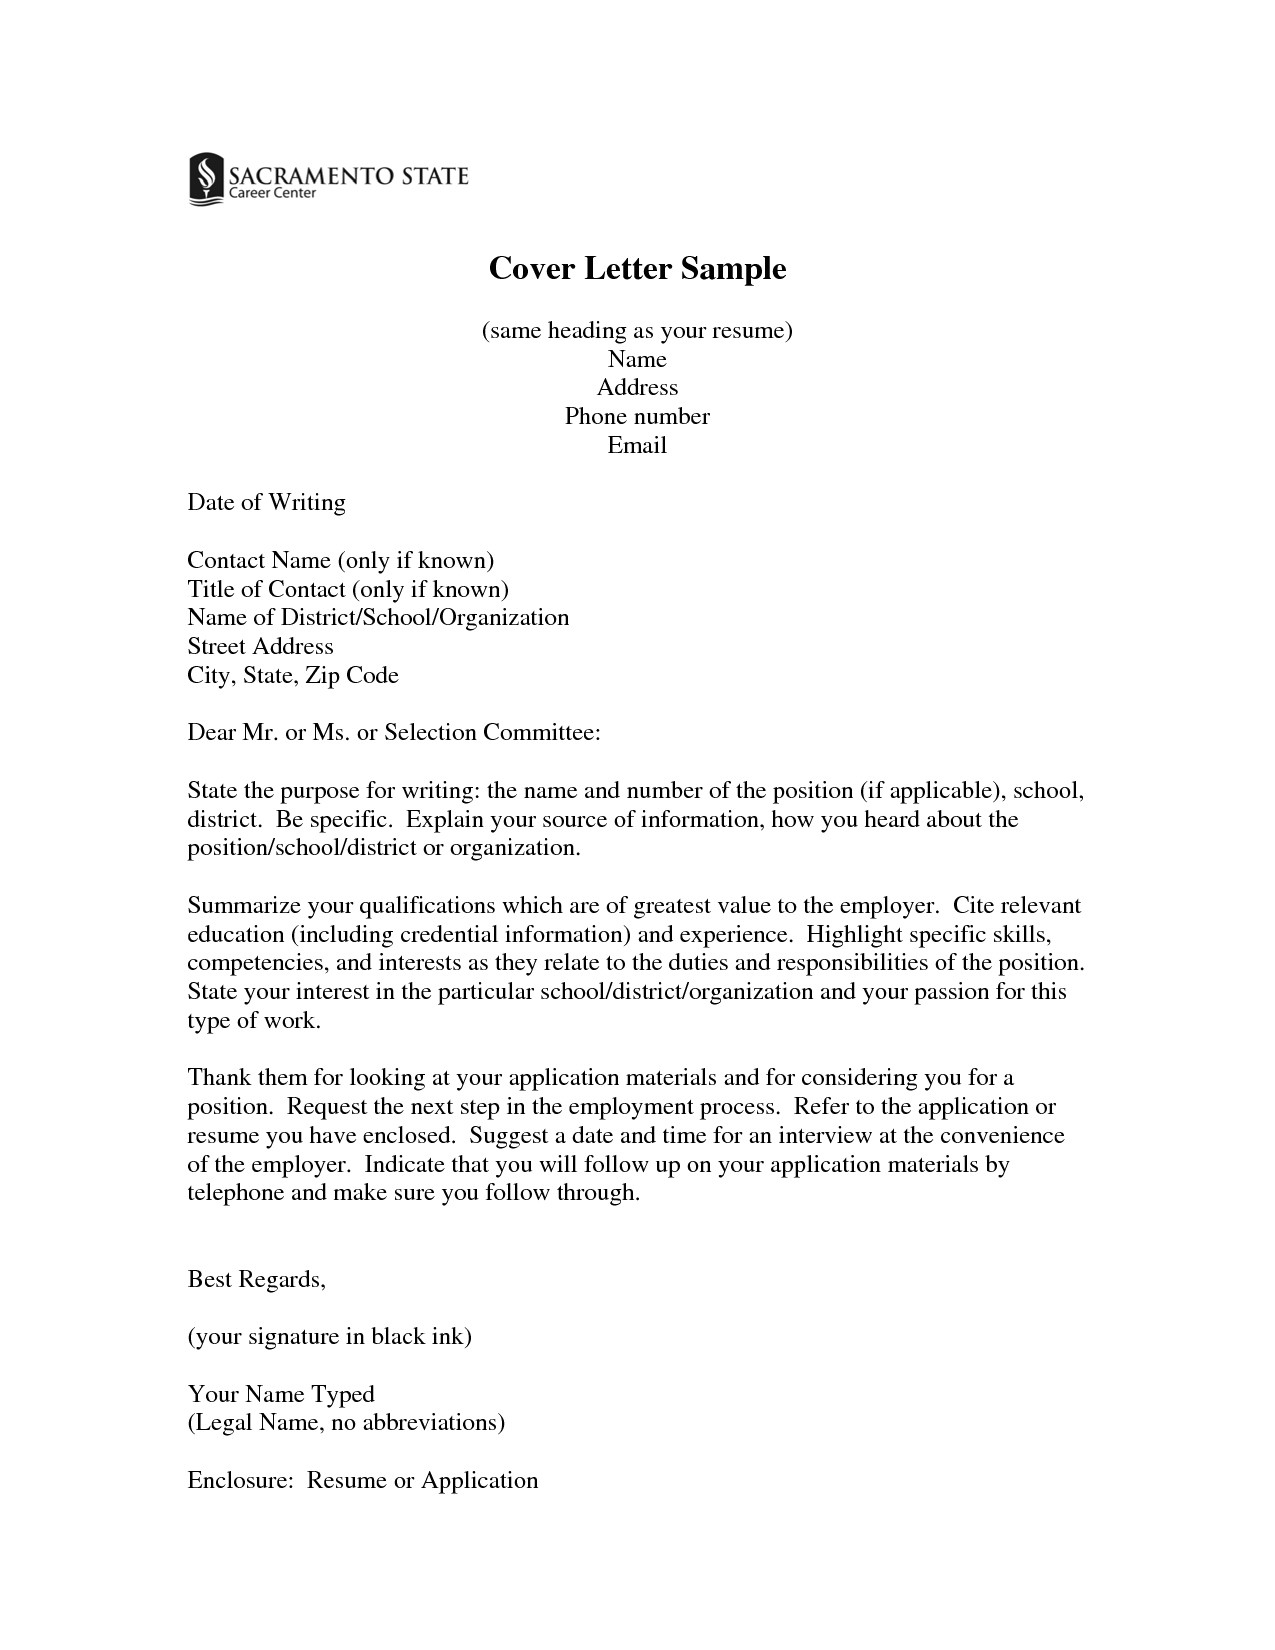 how to address a cover letter without contact information